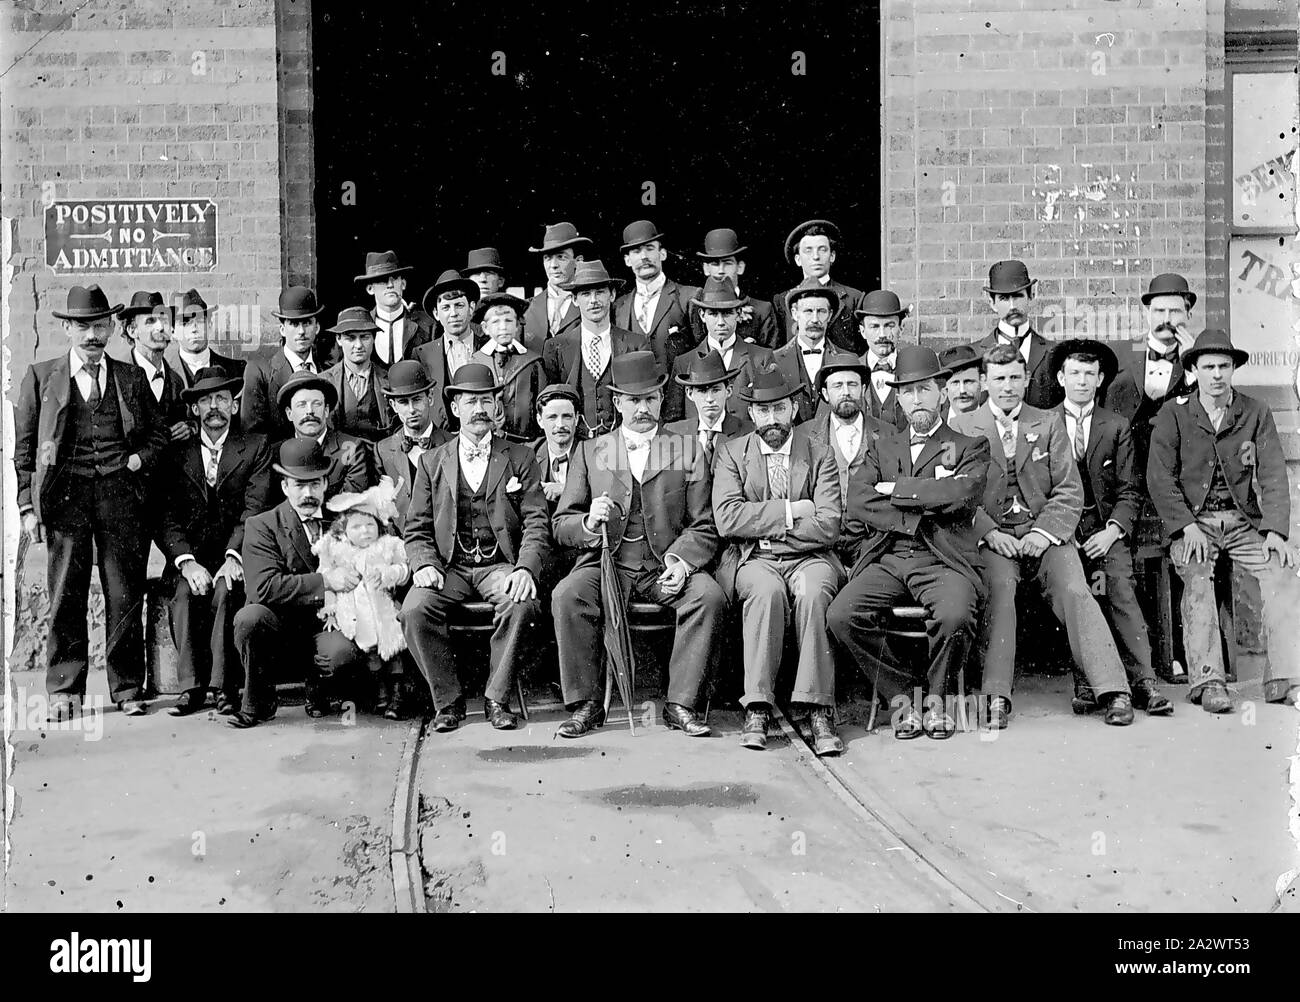 Negative - Bendigo, Victoria, circa 1905, A group of men at a tram entrance of the Bendigo Tramways. The men are all well-dressed and one holds a baby on his knee Stock Photo